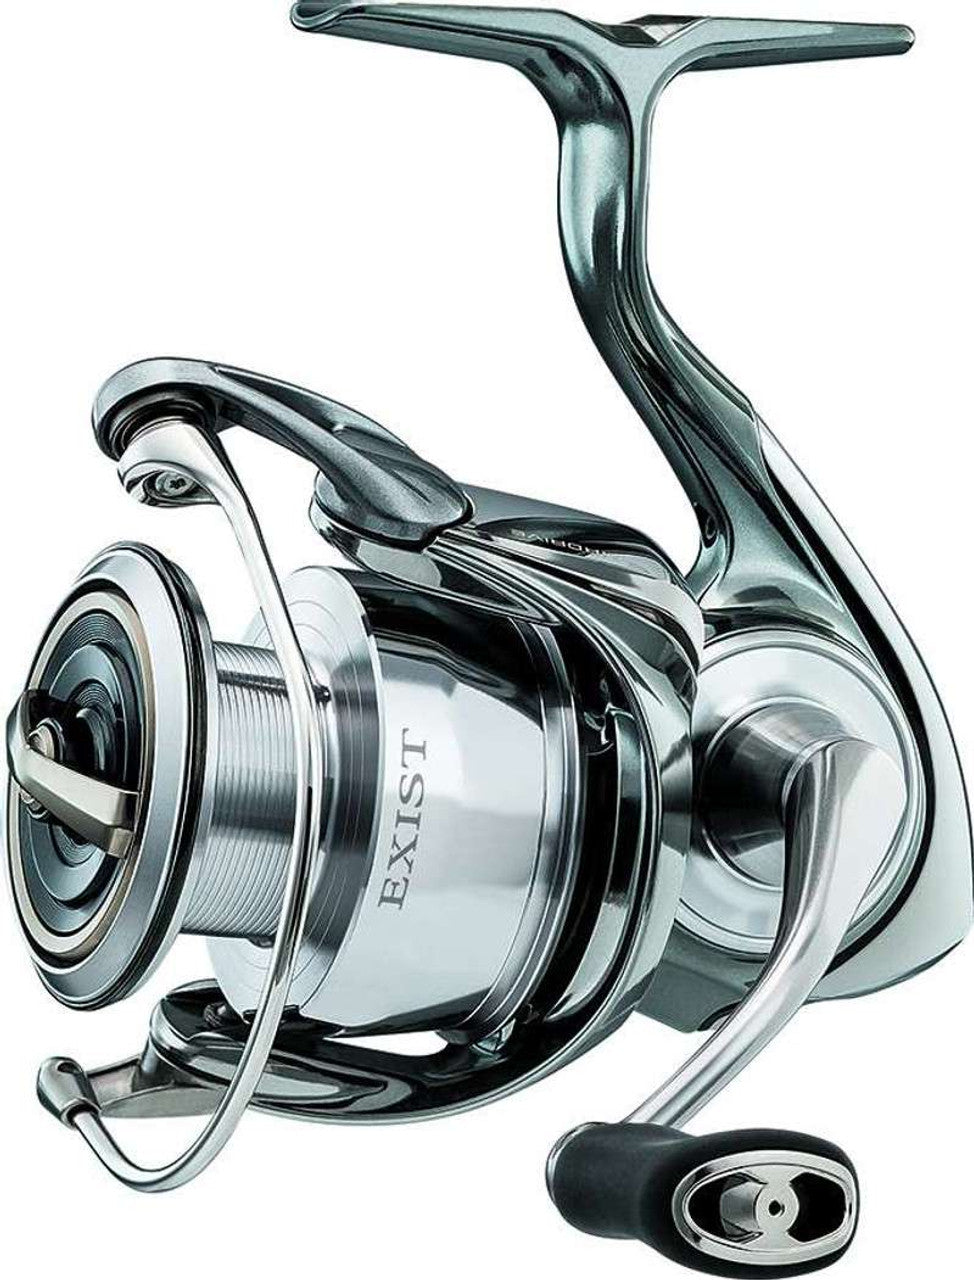 Fishing Reel, TW Series Labor Saving High Strength Environmental Protection  Metal Spinning Fishing Reel for Saltwater(TW2500 Shallow Line Cup),  Baitcasting Reels -  Canada